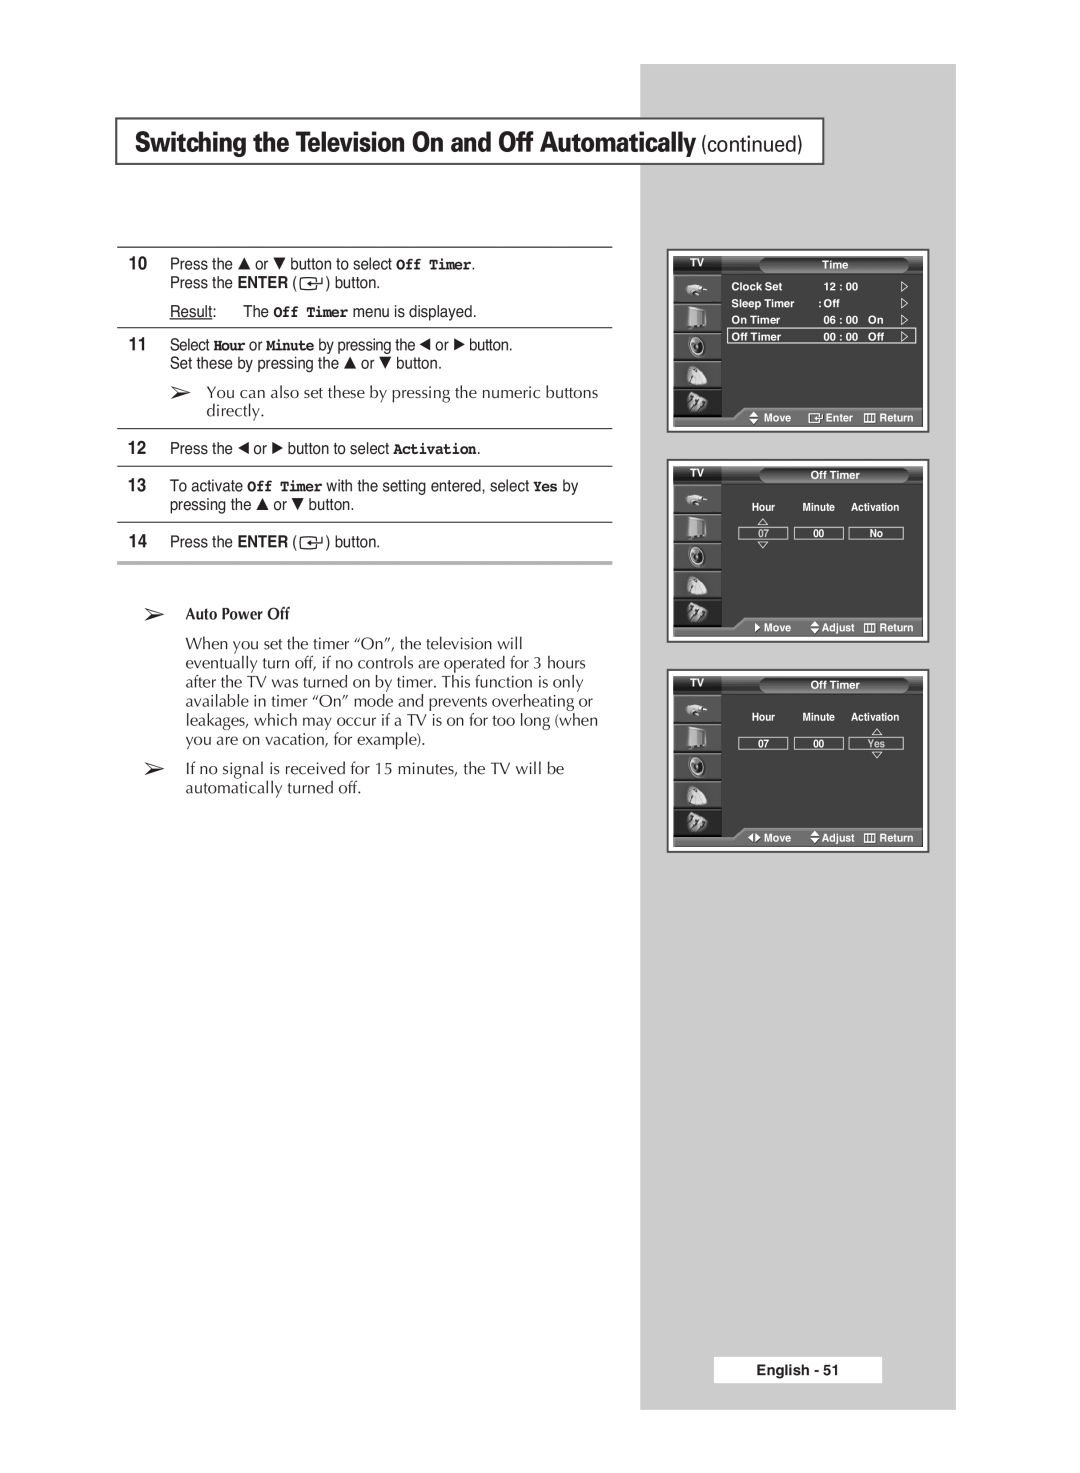 Samsung PS-42S5S manual Switching the Television On and Off Automatically continued, Auto Power Off 